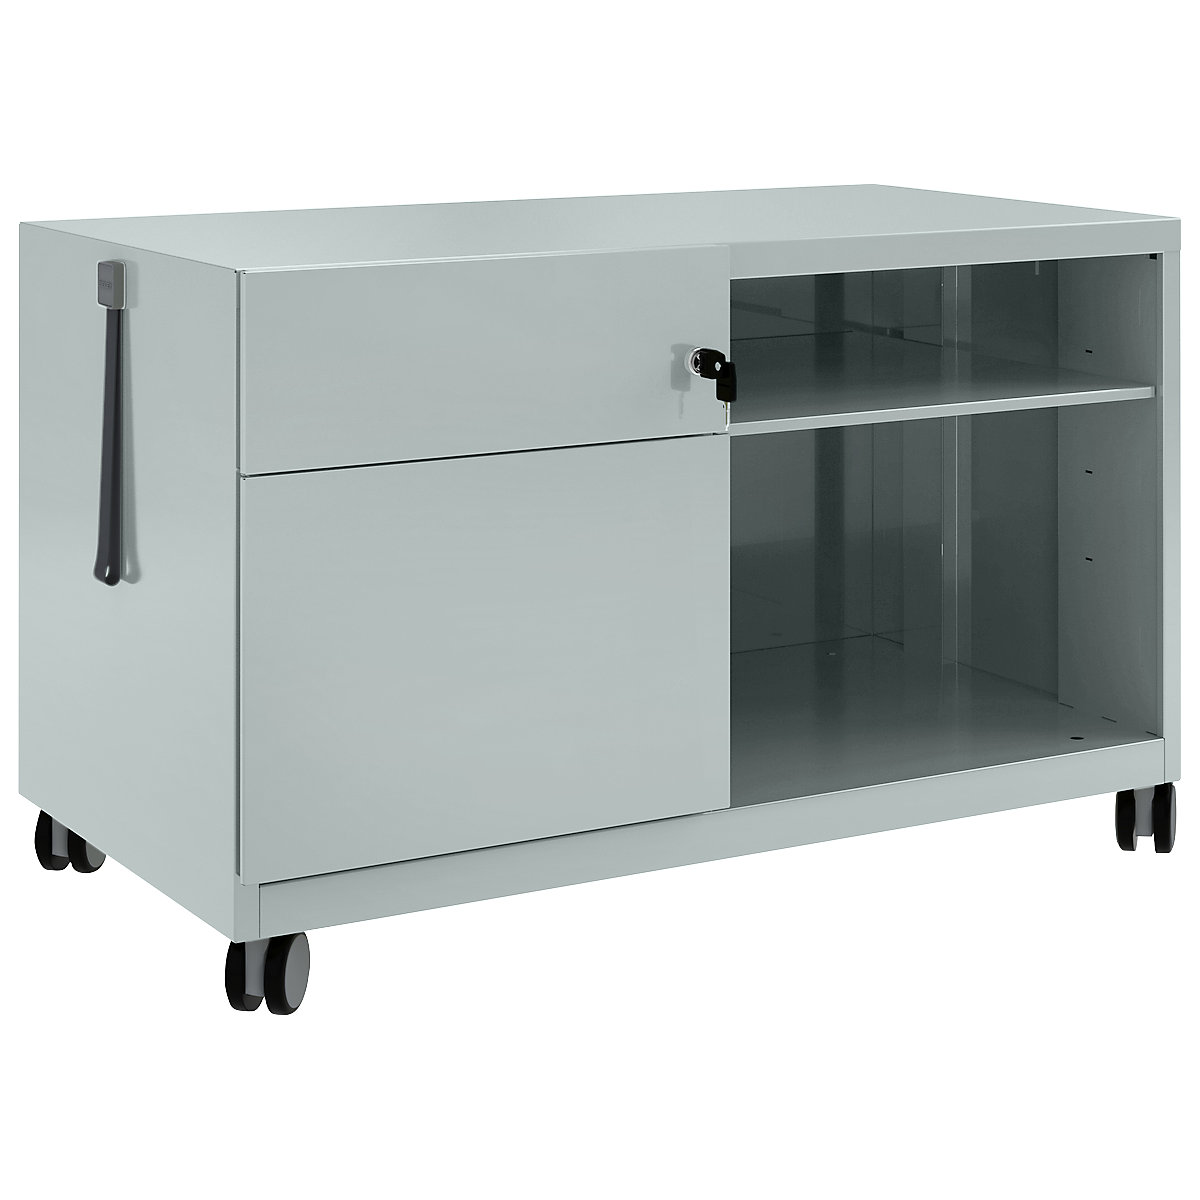 Chariot Note&trade; CADDY, h x l x p 563 x 900 x 490 mm - BISLEY